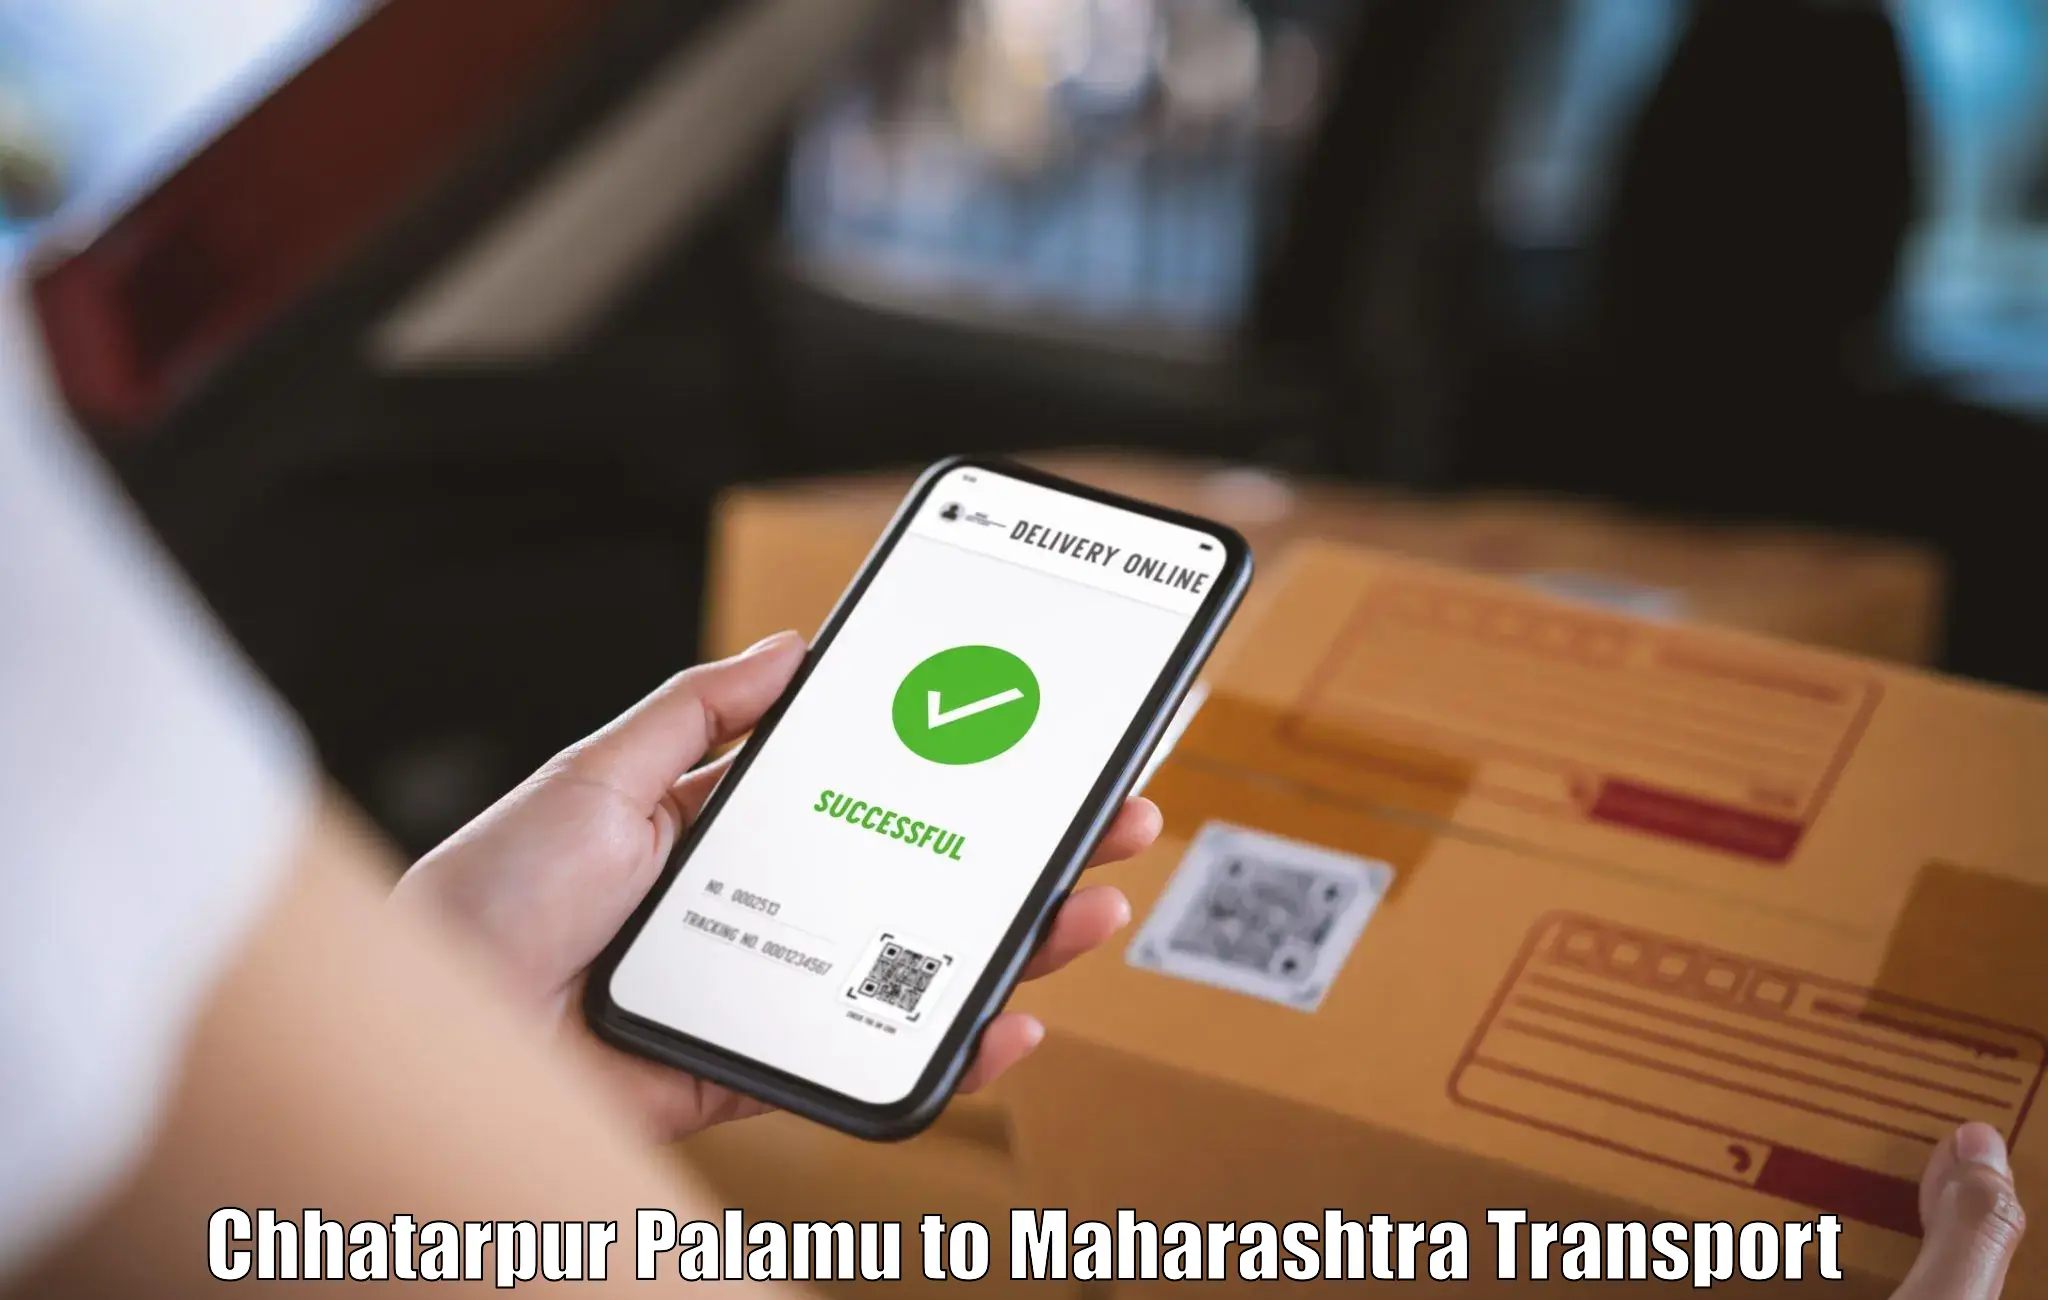 Goods delivery service in Chhatarpur Palamu to Hinganghat